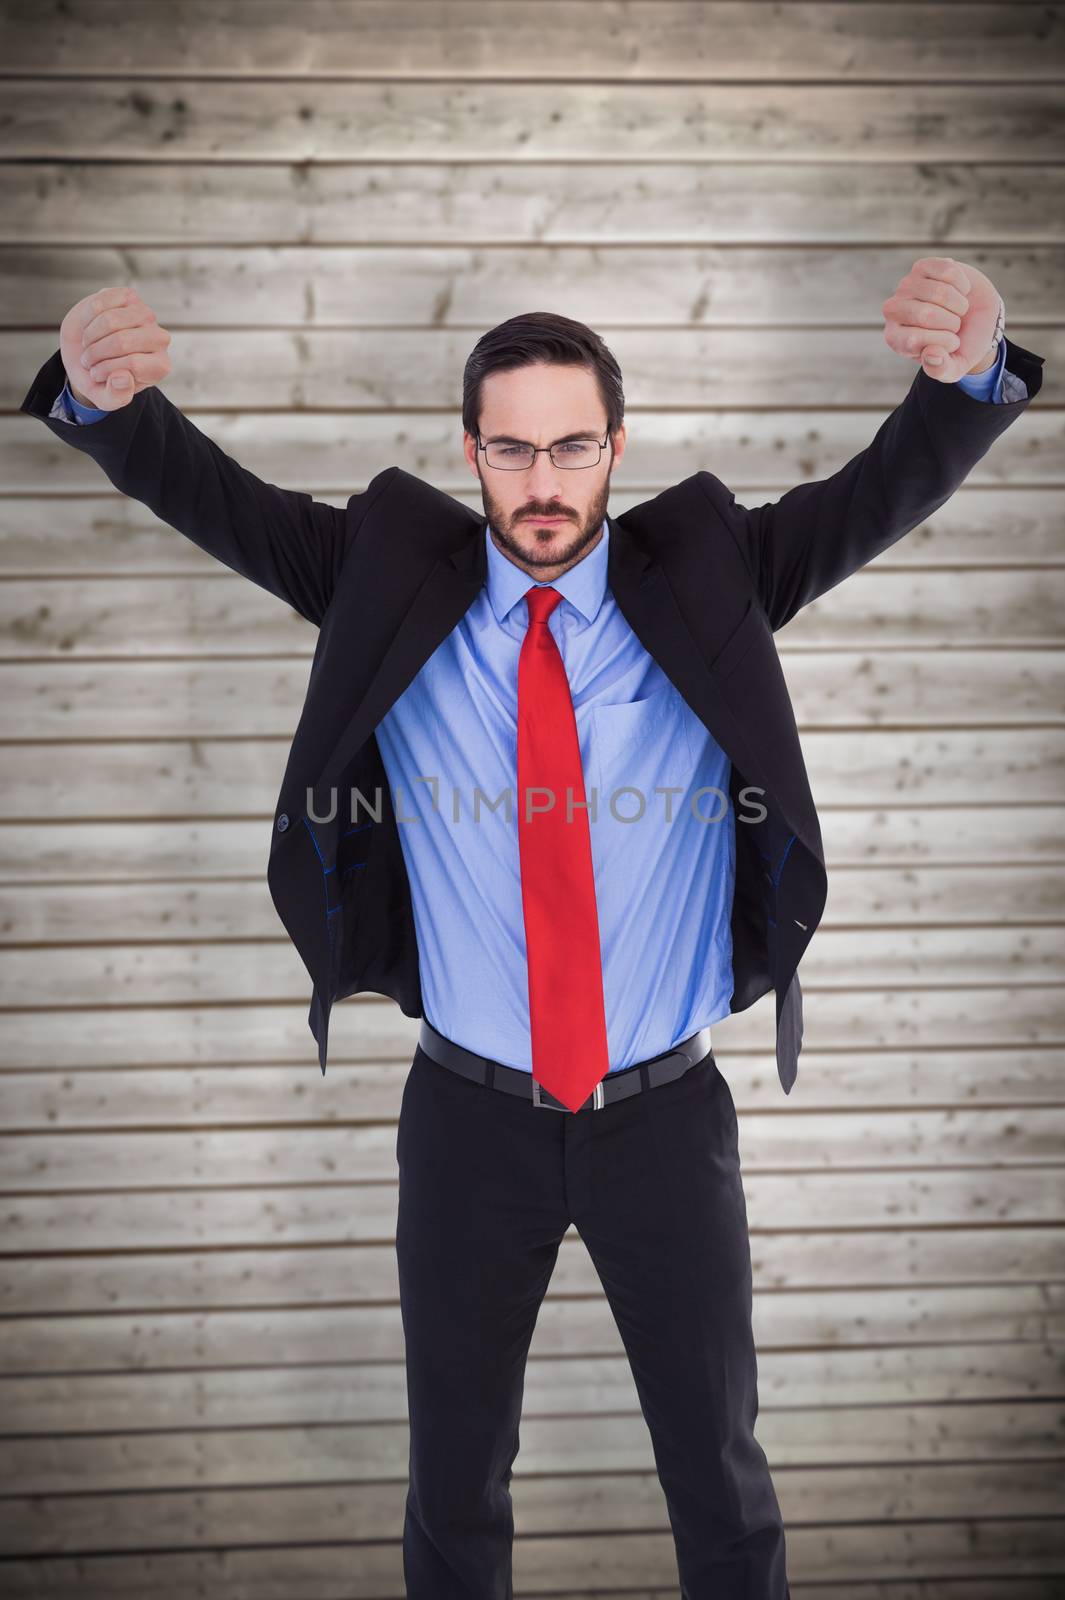 Unsmiling businessman standing with arms raised against wooden planks background